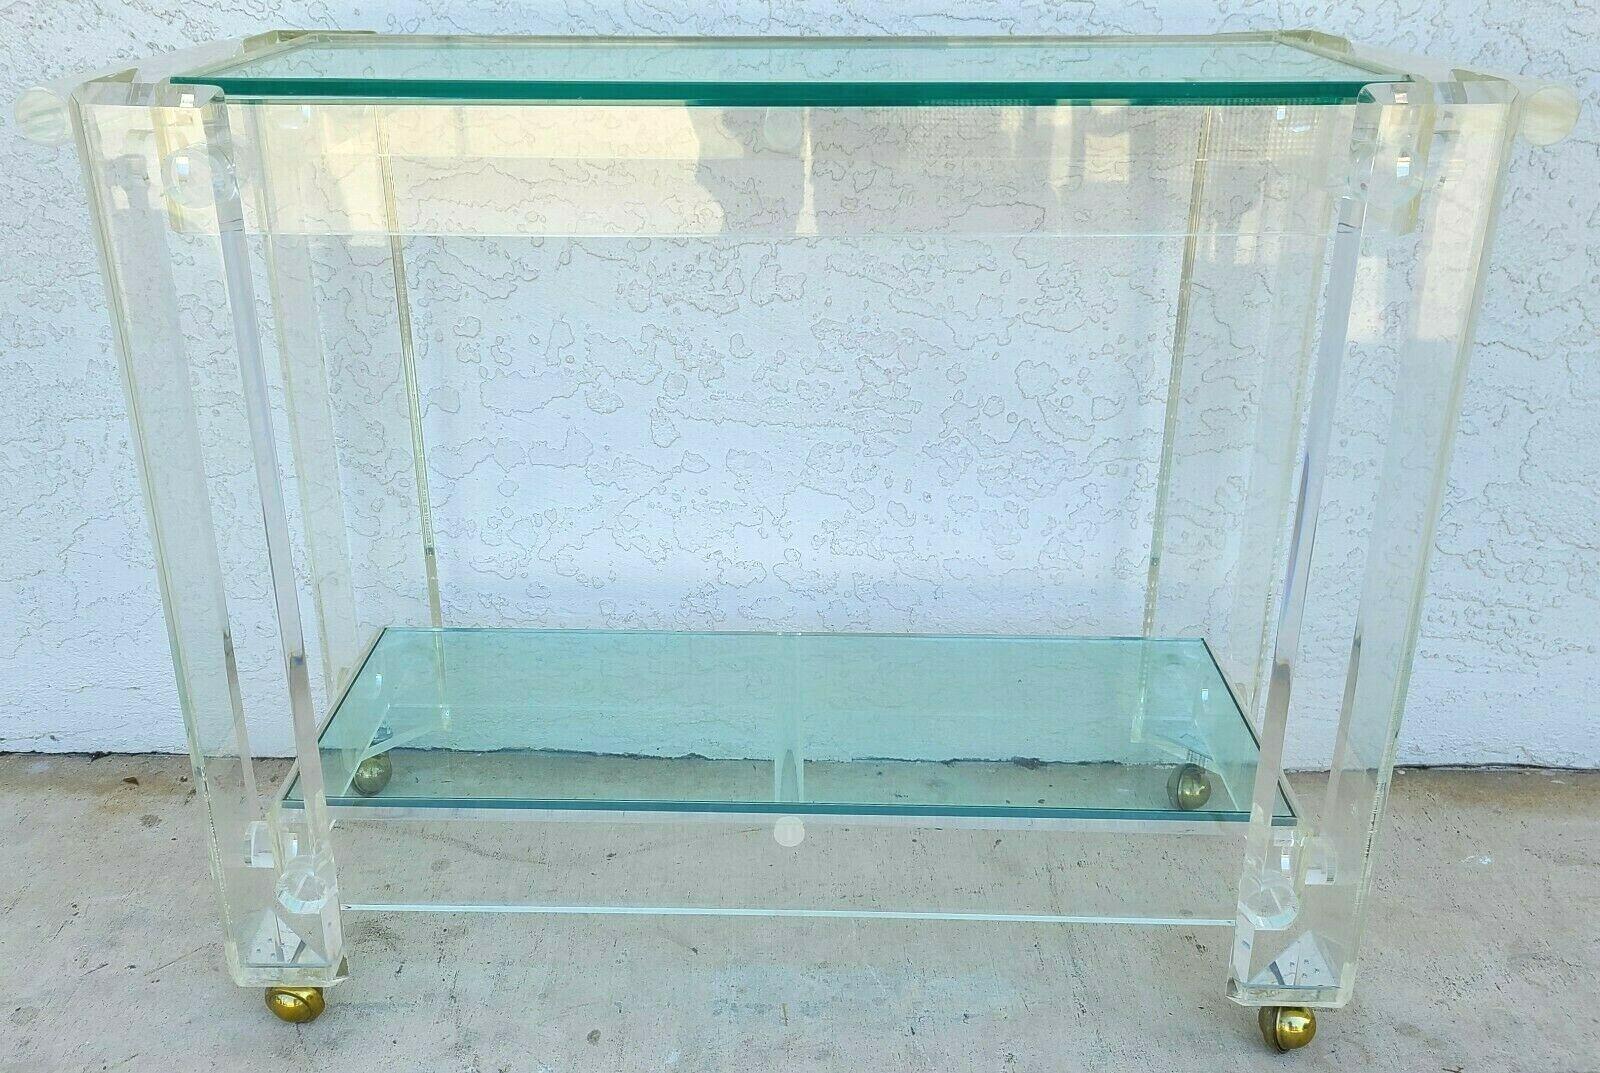 Offering one of our recent palm beach estate fine furniture acquisitions of a
Vintage 1970s Thick Lucite & glass rolling bar serving cart
With vintage shepard casters

Approximate measurements in inches
30